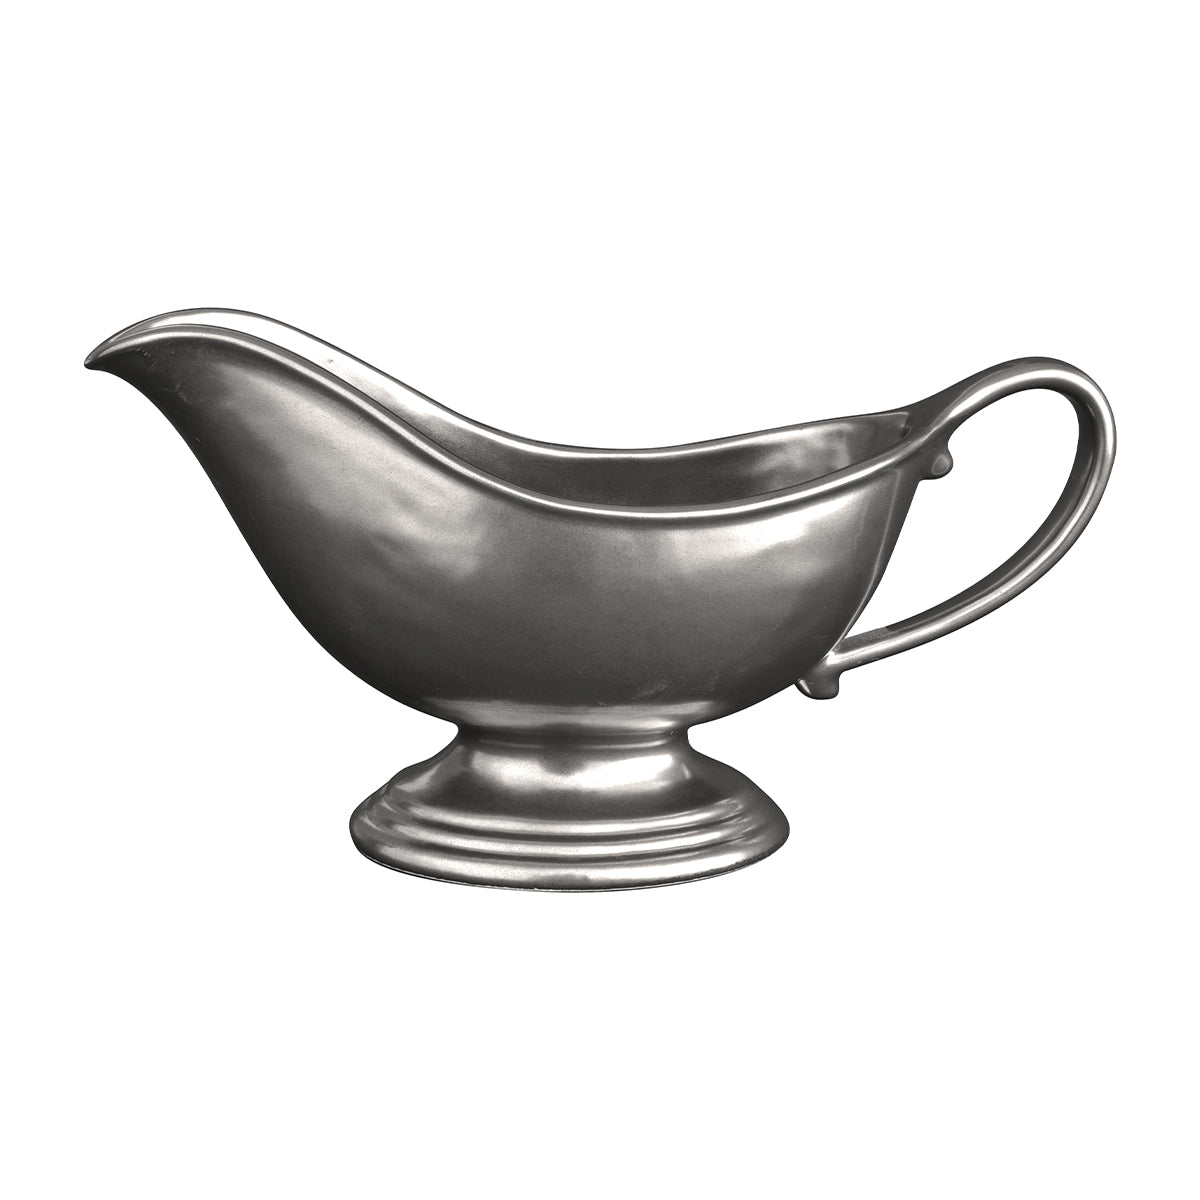 From our Pewter Stoneware Collection - A great finishing touch for your Pewter Stoneware collection, our sauce boat has a lovely silhouette and is perfect for your most decadent sauces and mouthwatering gravies.